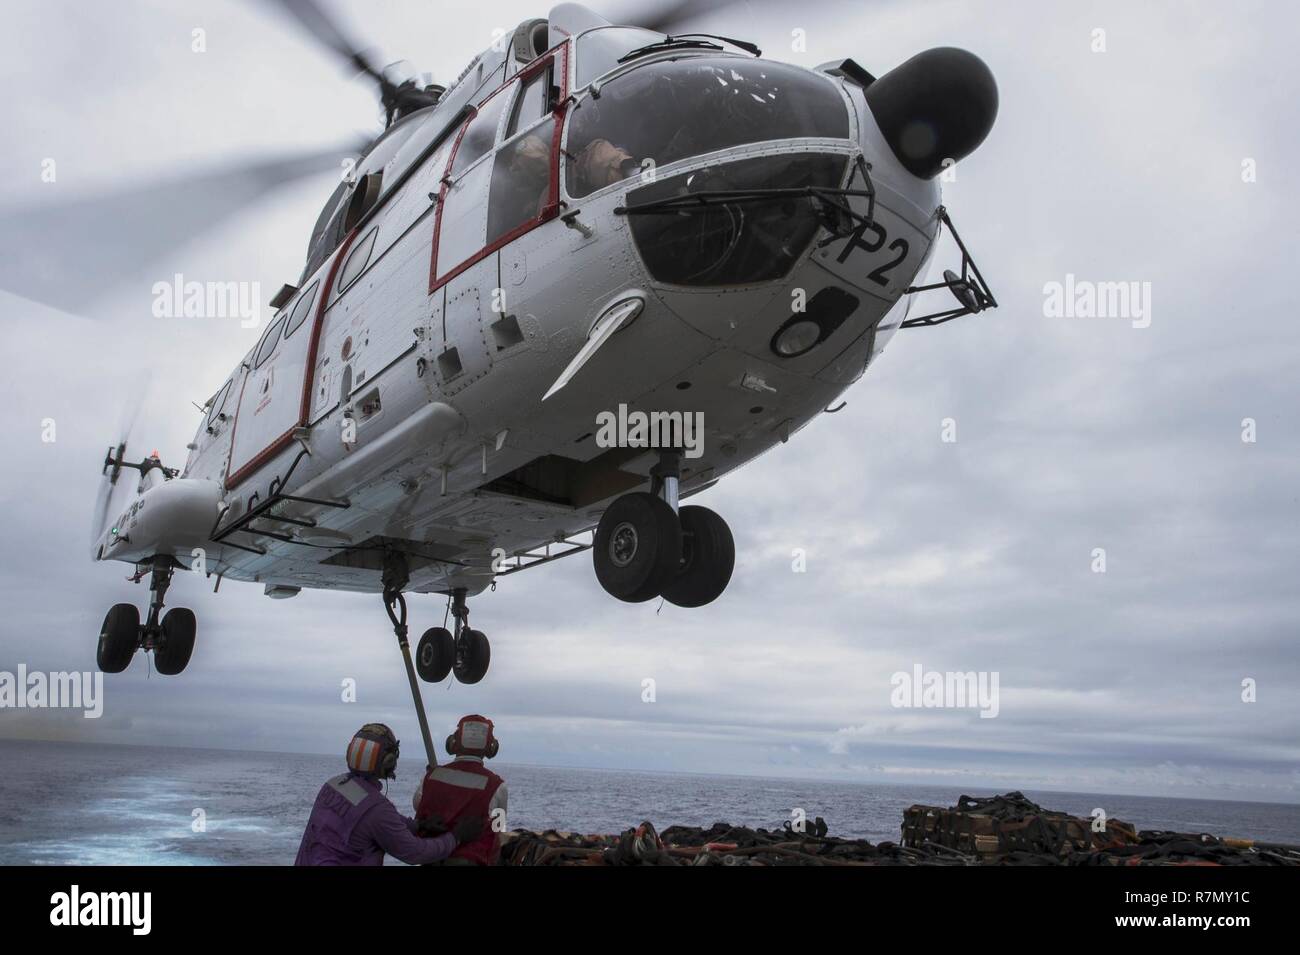 EAST CHINA SEA (March 20, 2017) Sailors attach cargo to an SA-330J Puma helicopter, assigned to the Military Sealift Command dry cargo and ammunition ship USNS Richard E. Byrd (T-AKE 4), on the flight deck of the amphibious transport dock ship USS Green Bay (LPD 20) during a vertical replenishment. Green Bay, part of the Bonhomme Richard Expeditionary Strike Group, with embarked 31st Marine Expeditionary Unit, is on a routine patrol, operating in the Indo-Asia-Pacific region to enhance warfighting readiness and posture forward as a ready-response force for any type of contingency. Stock Photo